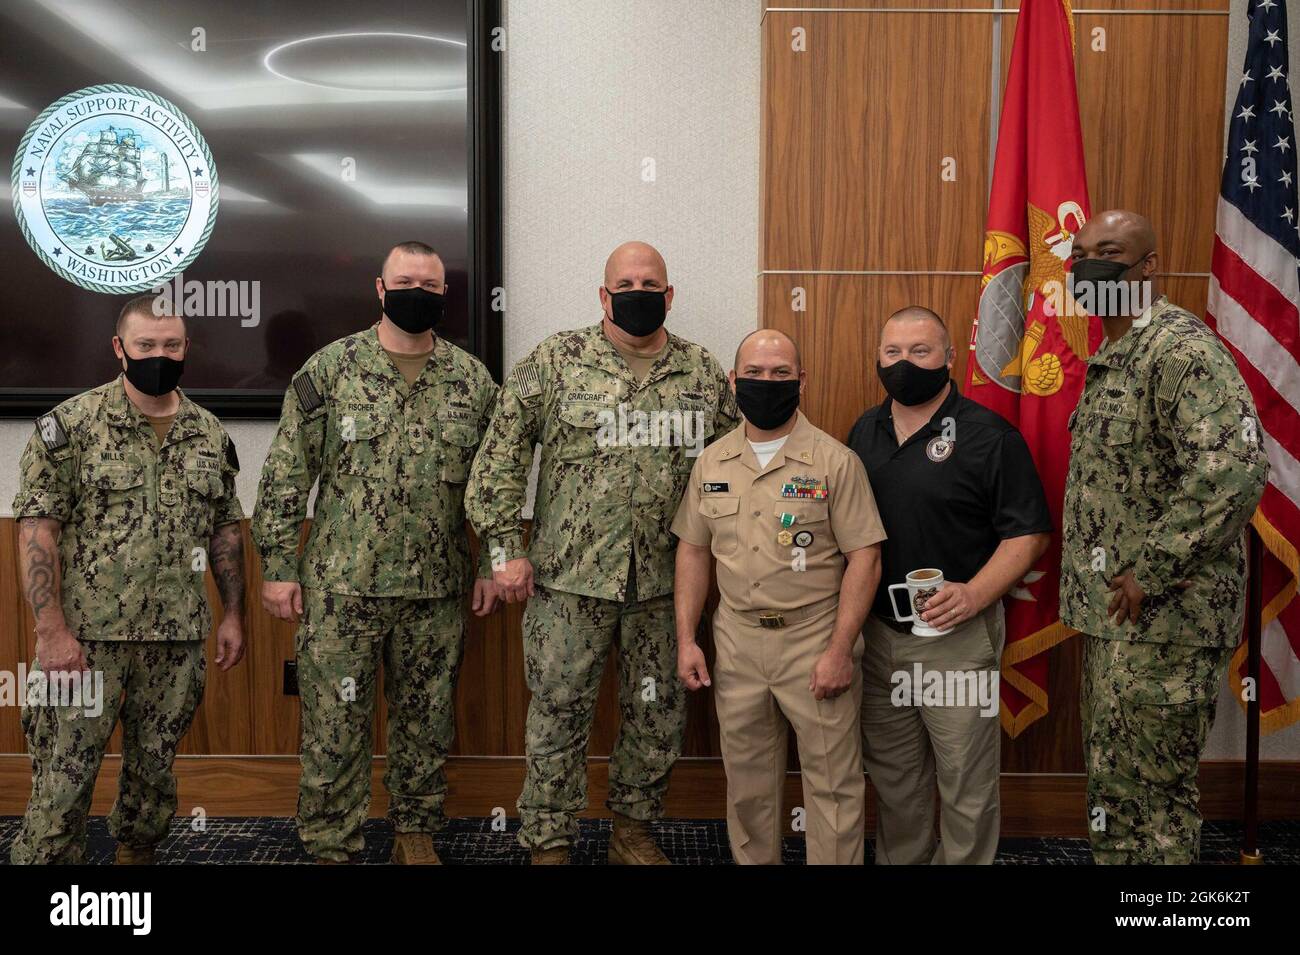 WASHINGTON, DC (Aug. 16, 2021) – Chief Navy Counselor Eduardo Rivera (center-right) poses with his colleagues following an award ceremony held onboard Washington Navy Yard. Stock Photo